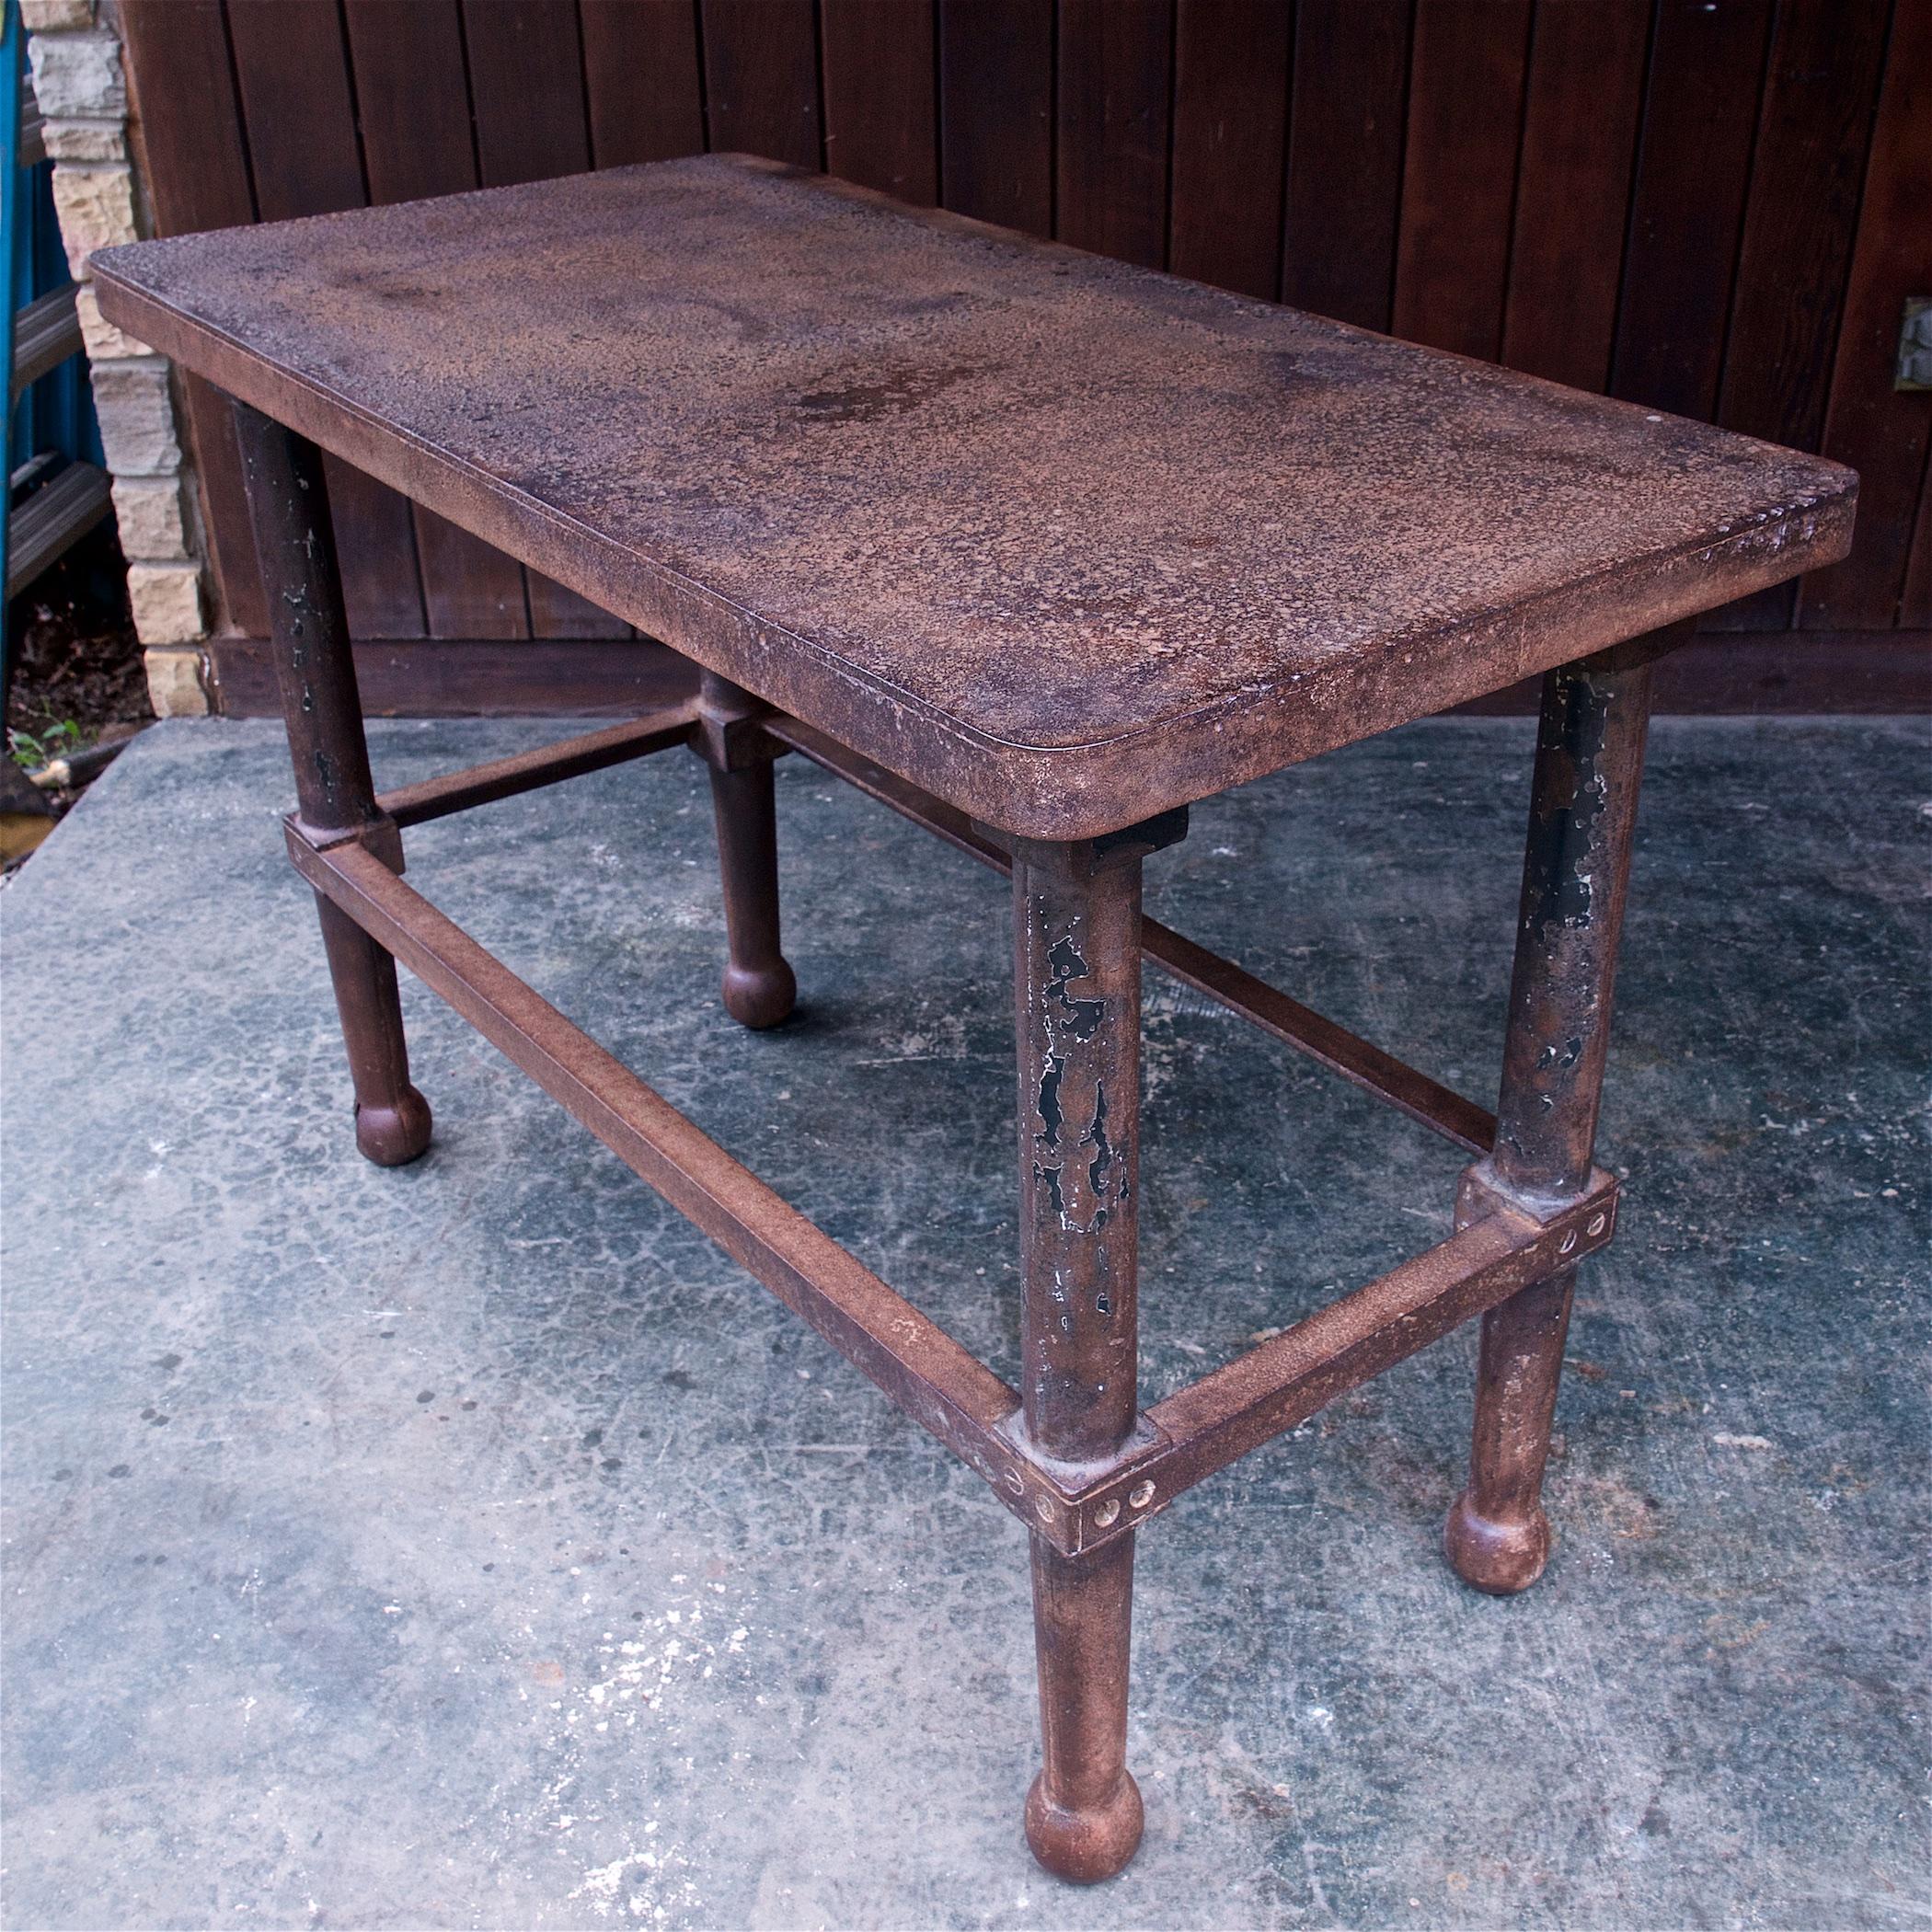 Late 19th Century 1880s Victorian Mercantile Forged Iron Work Table Vintage Industrial Console For Sale